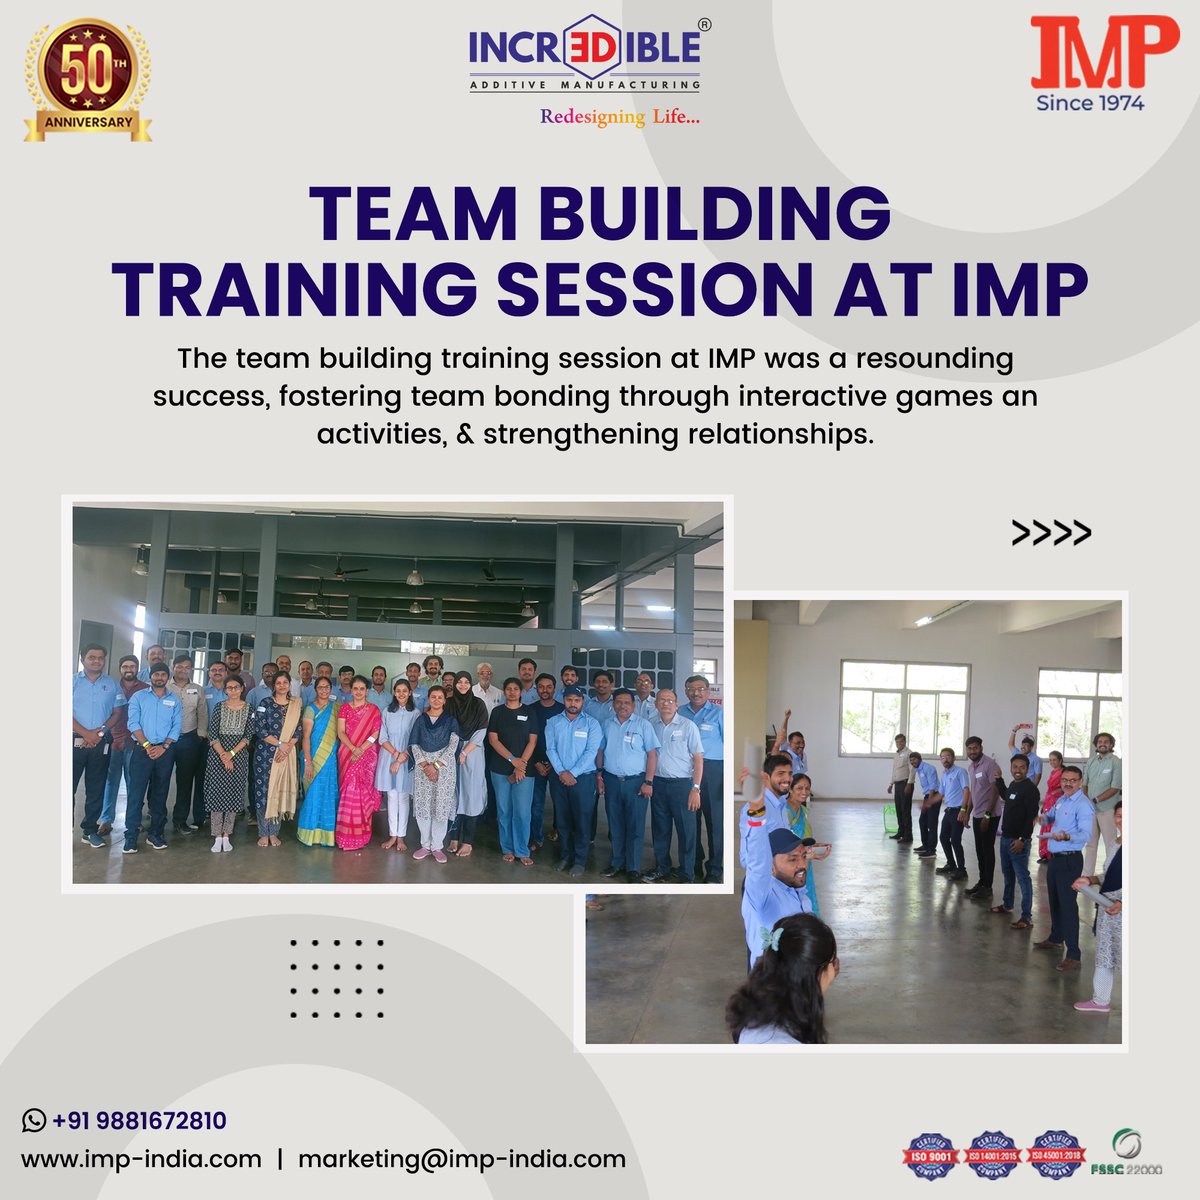 Thrilled to share the success of our team building session at IMP!
.
.

#TeamBuilding #IMPTeam #SuccessStories #BondingMoments #TeamUnity #StrongerTogether #InteractiveActivities #RelationshipBuilding #TeamworkWins #CollaborativeCulture #WorkplaceDevelopment #TeamEngagement #IMP